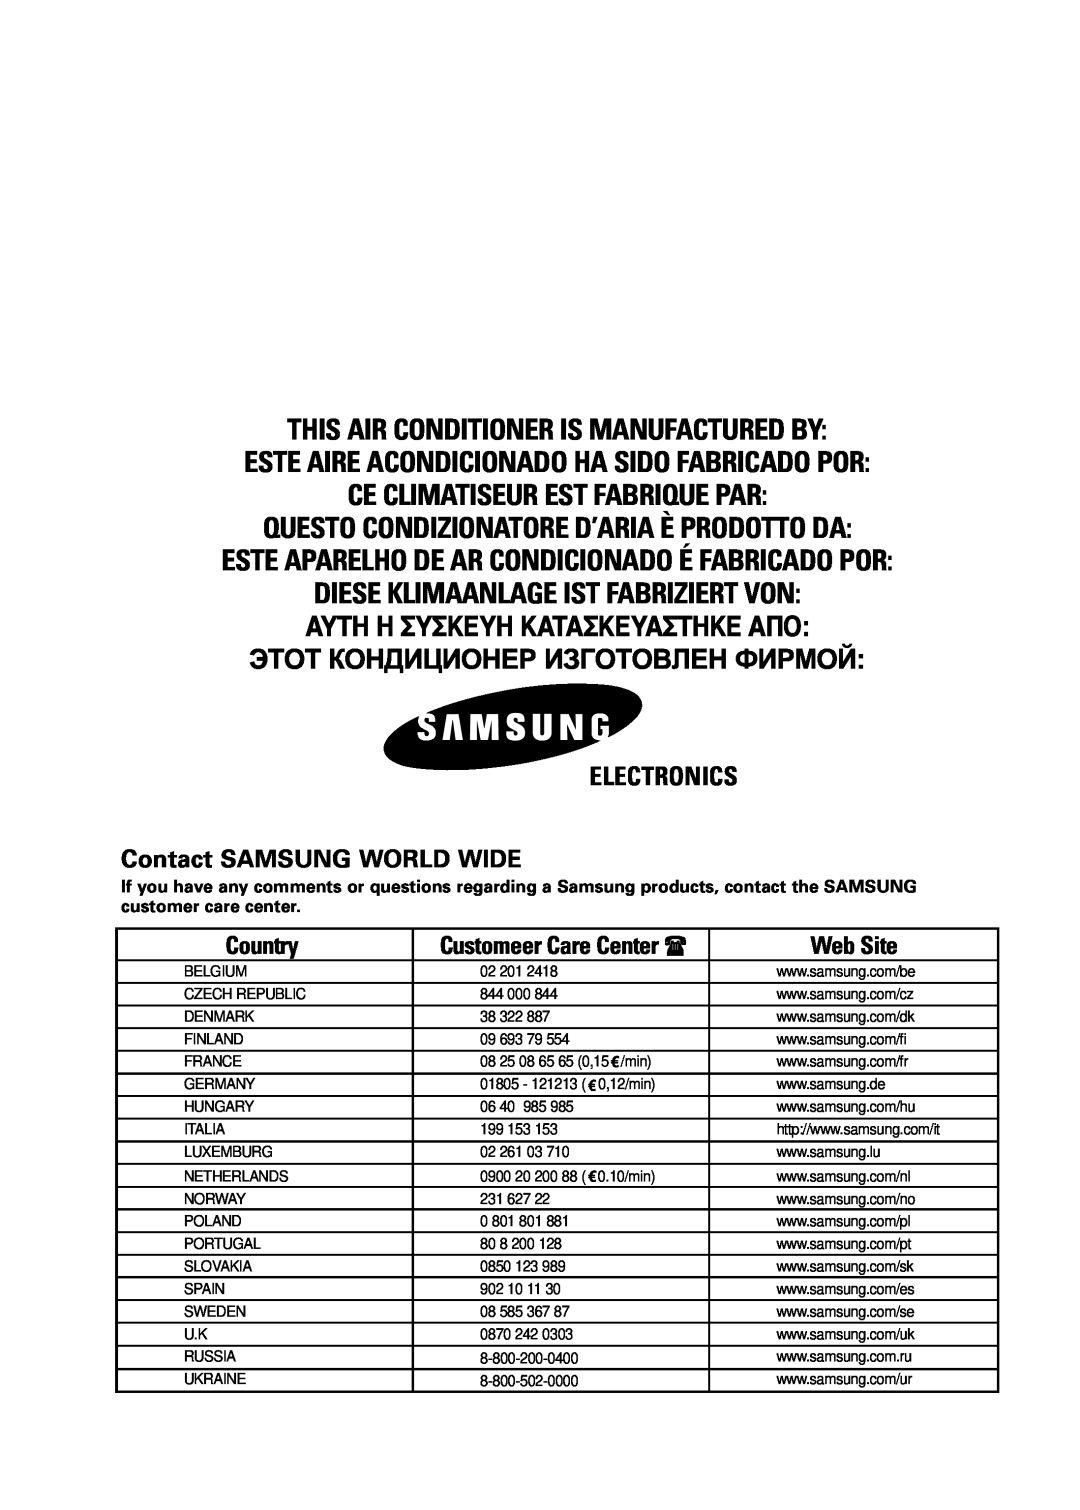 Samsung AVMKH026EA(B)0 Contact SAMSUNG WORLD WIDE, Country, Web Site, This Air Conditioner Is Manufactured By, Electronics 